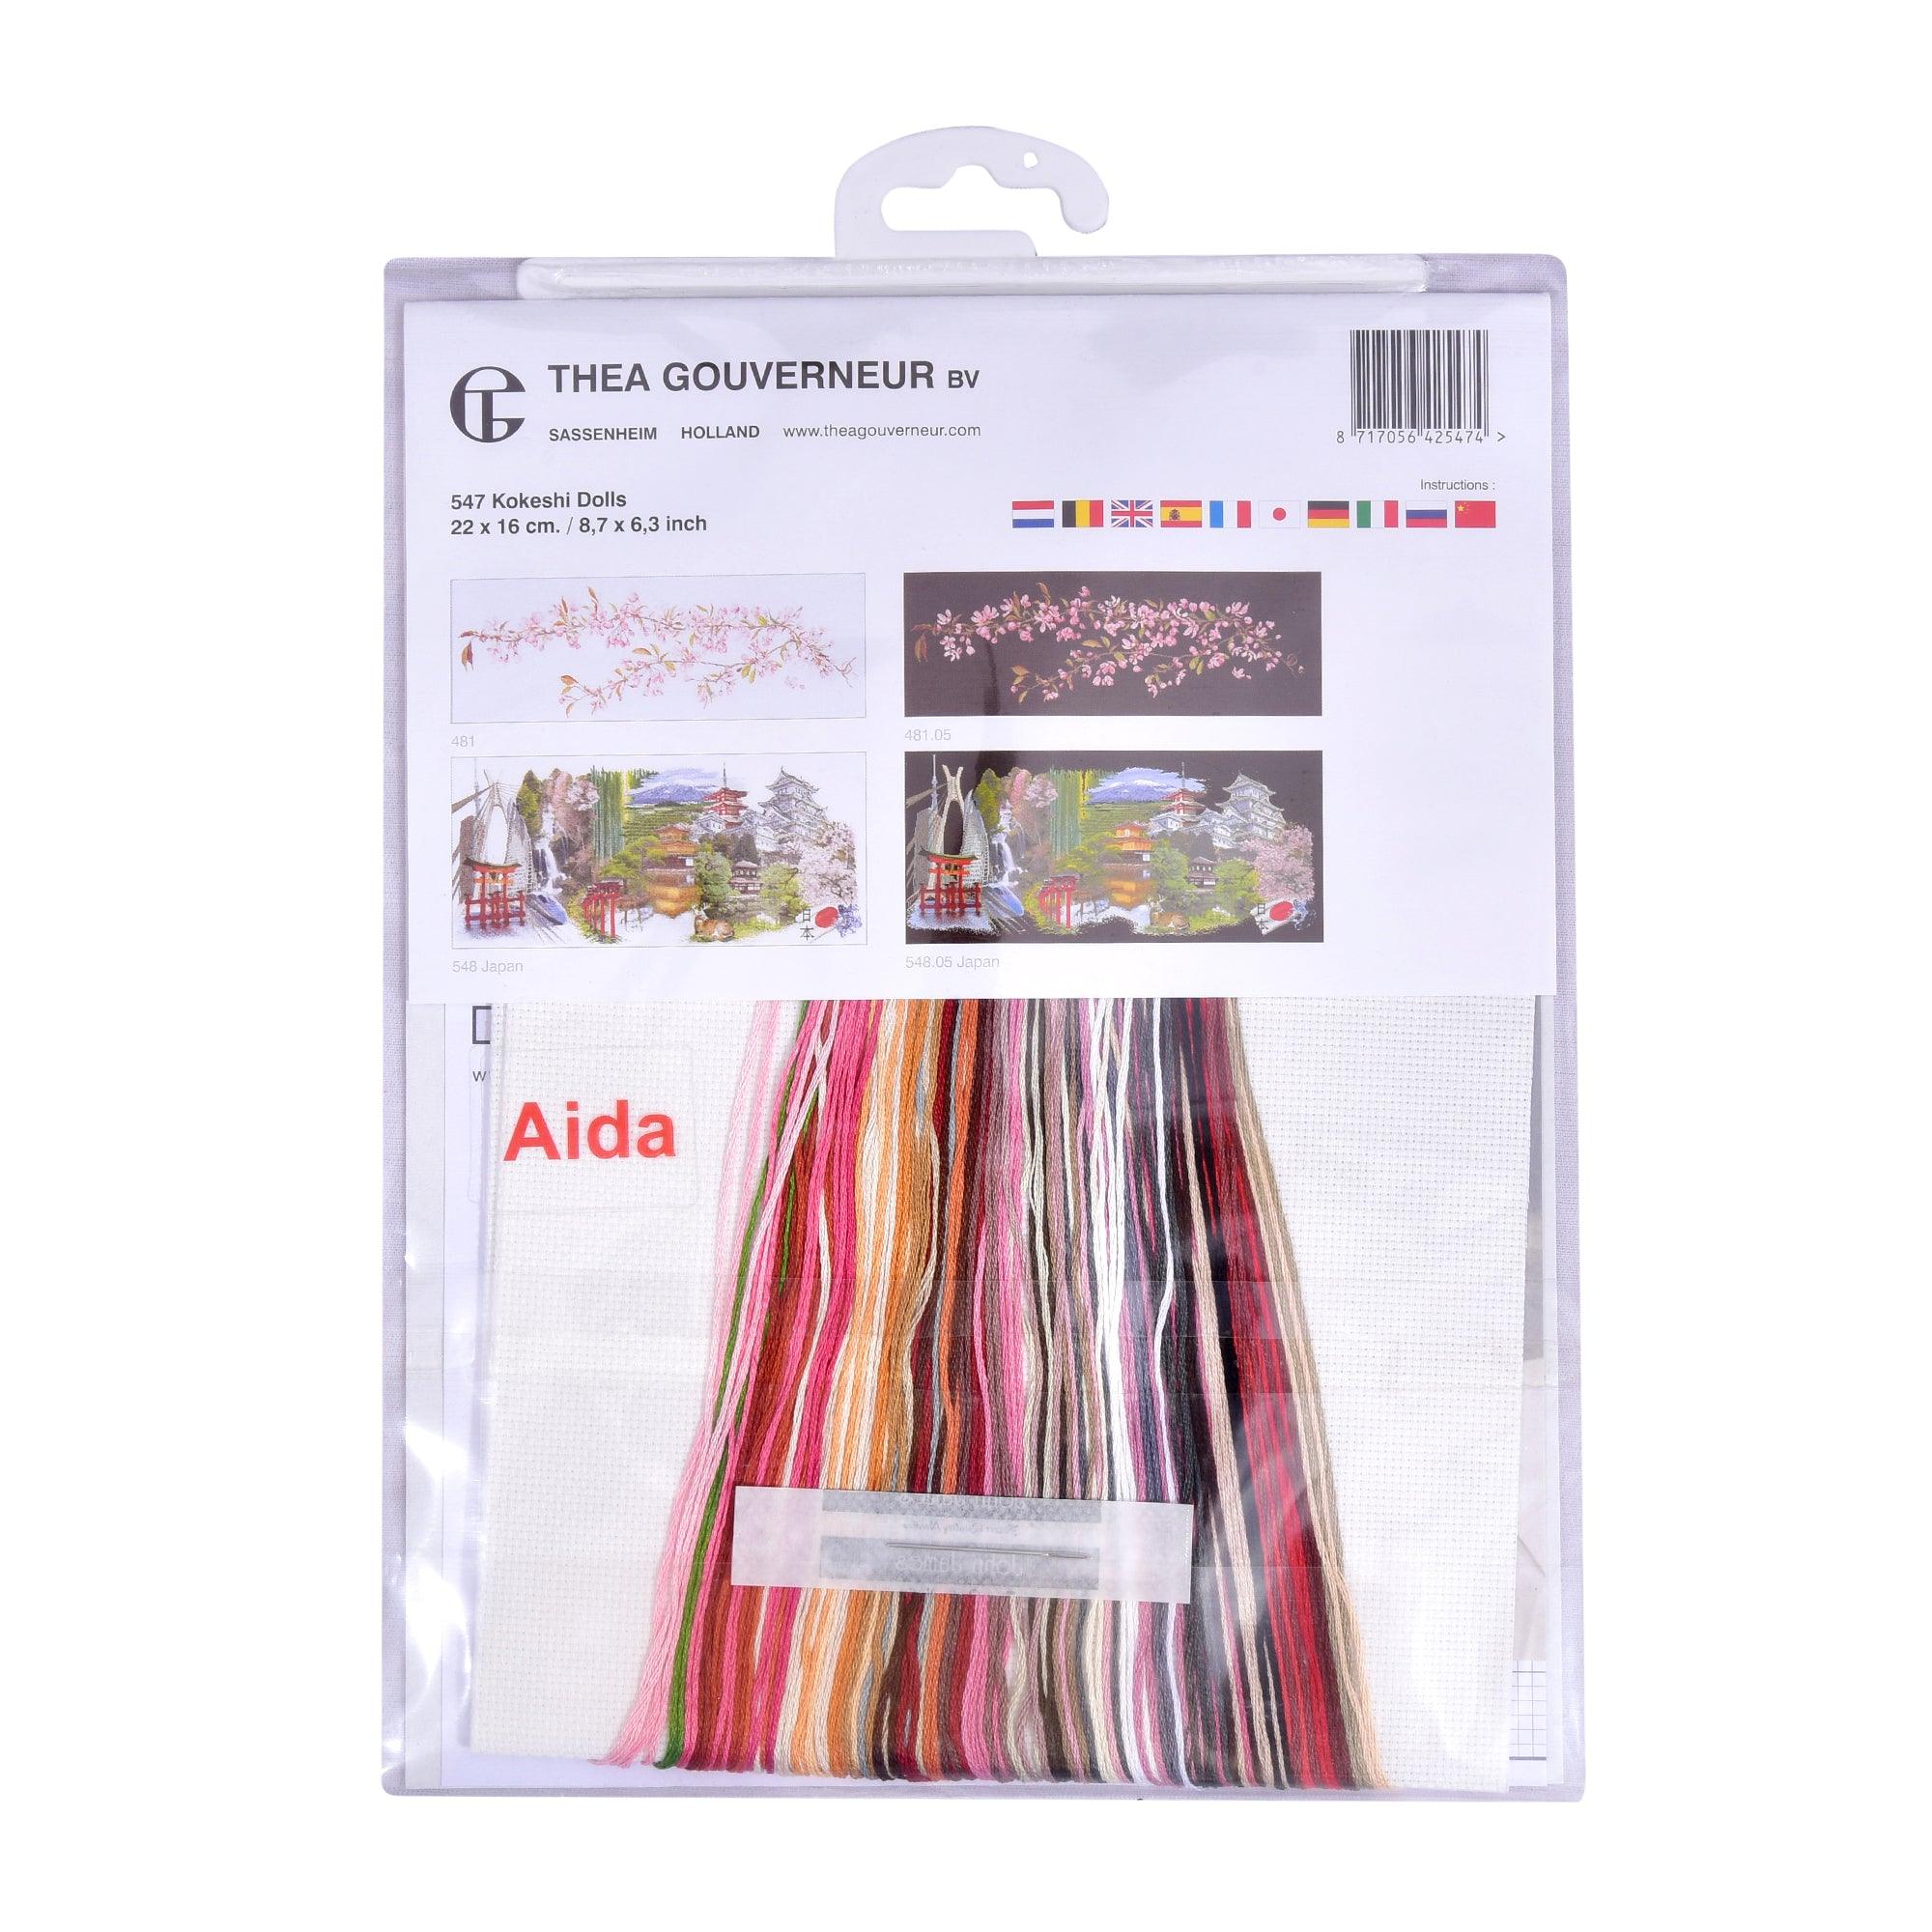 Thea Gouverneur - Counted Cross Stitch Kit - Kokeshi Dolls - Aida - 18 count - 547A - Thea Gouverneur Since 1959